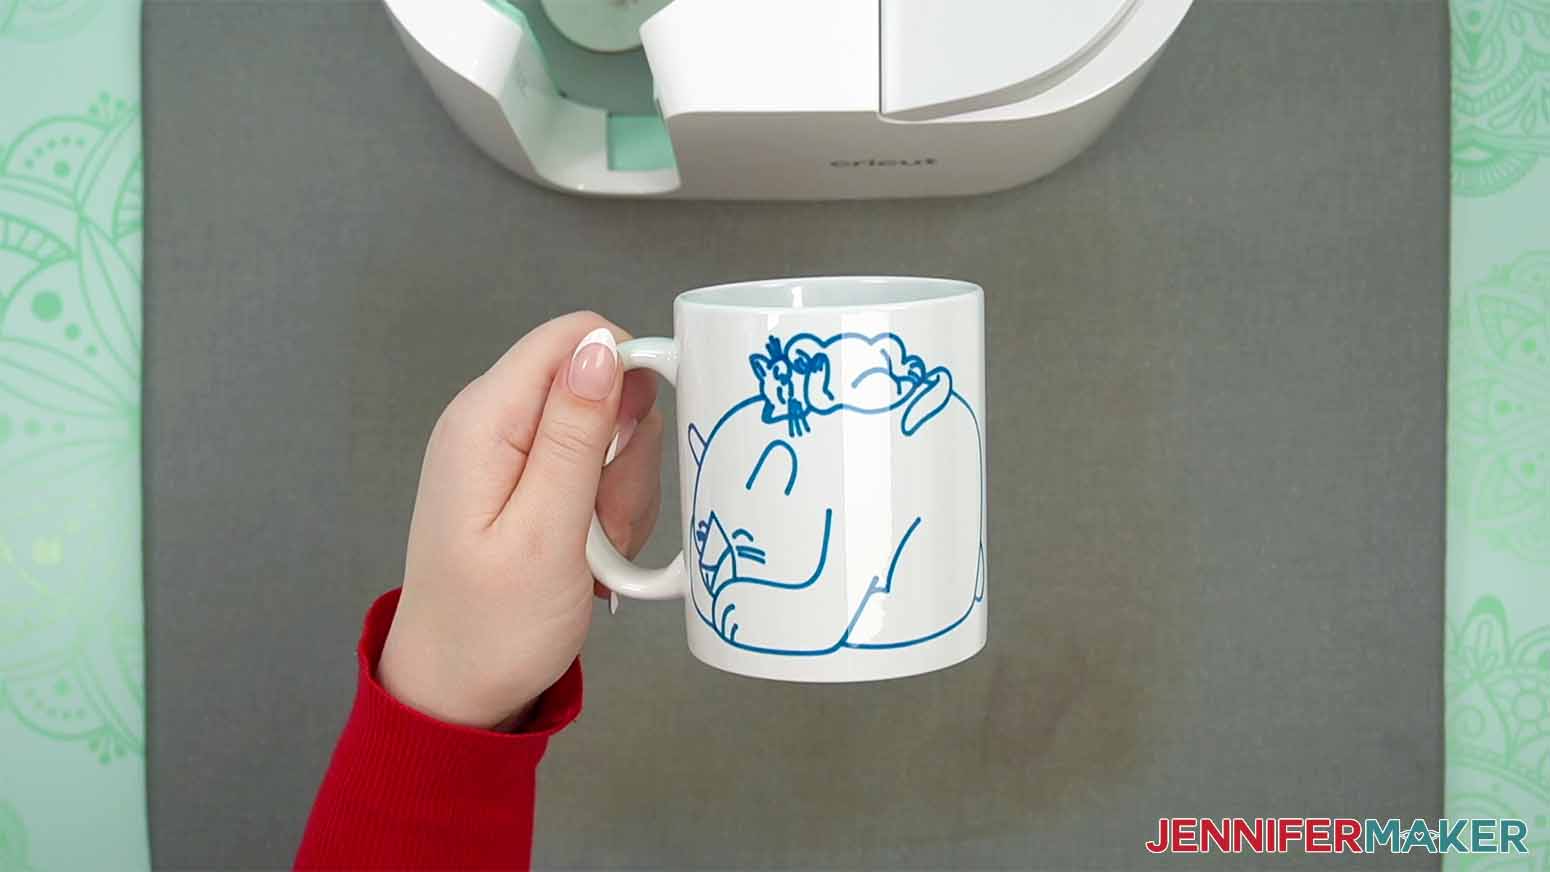 How to Draw with Cricut. An image in the completed snuggle fits mug